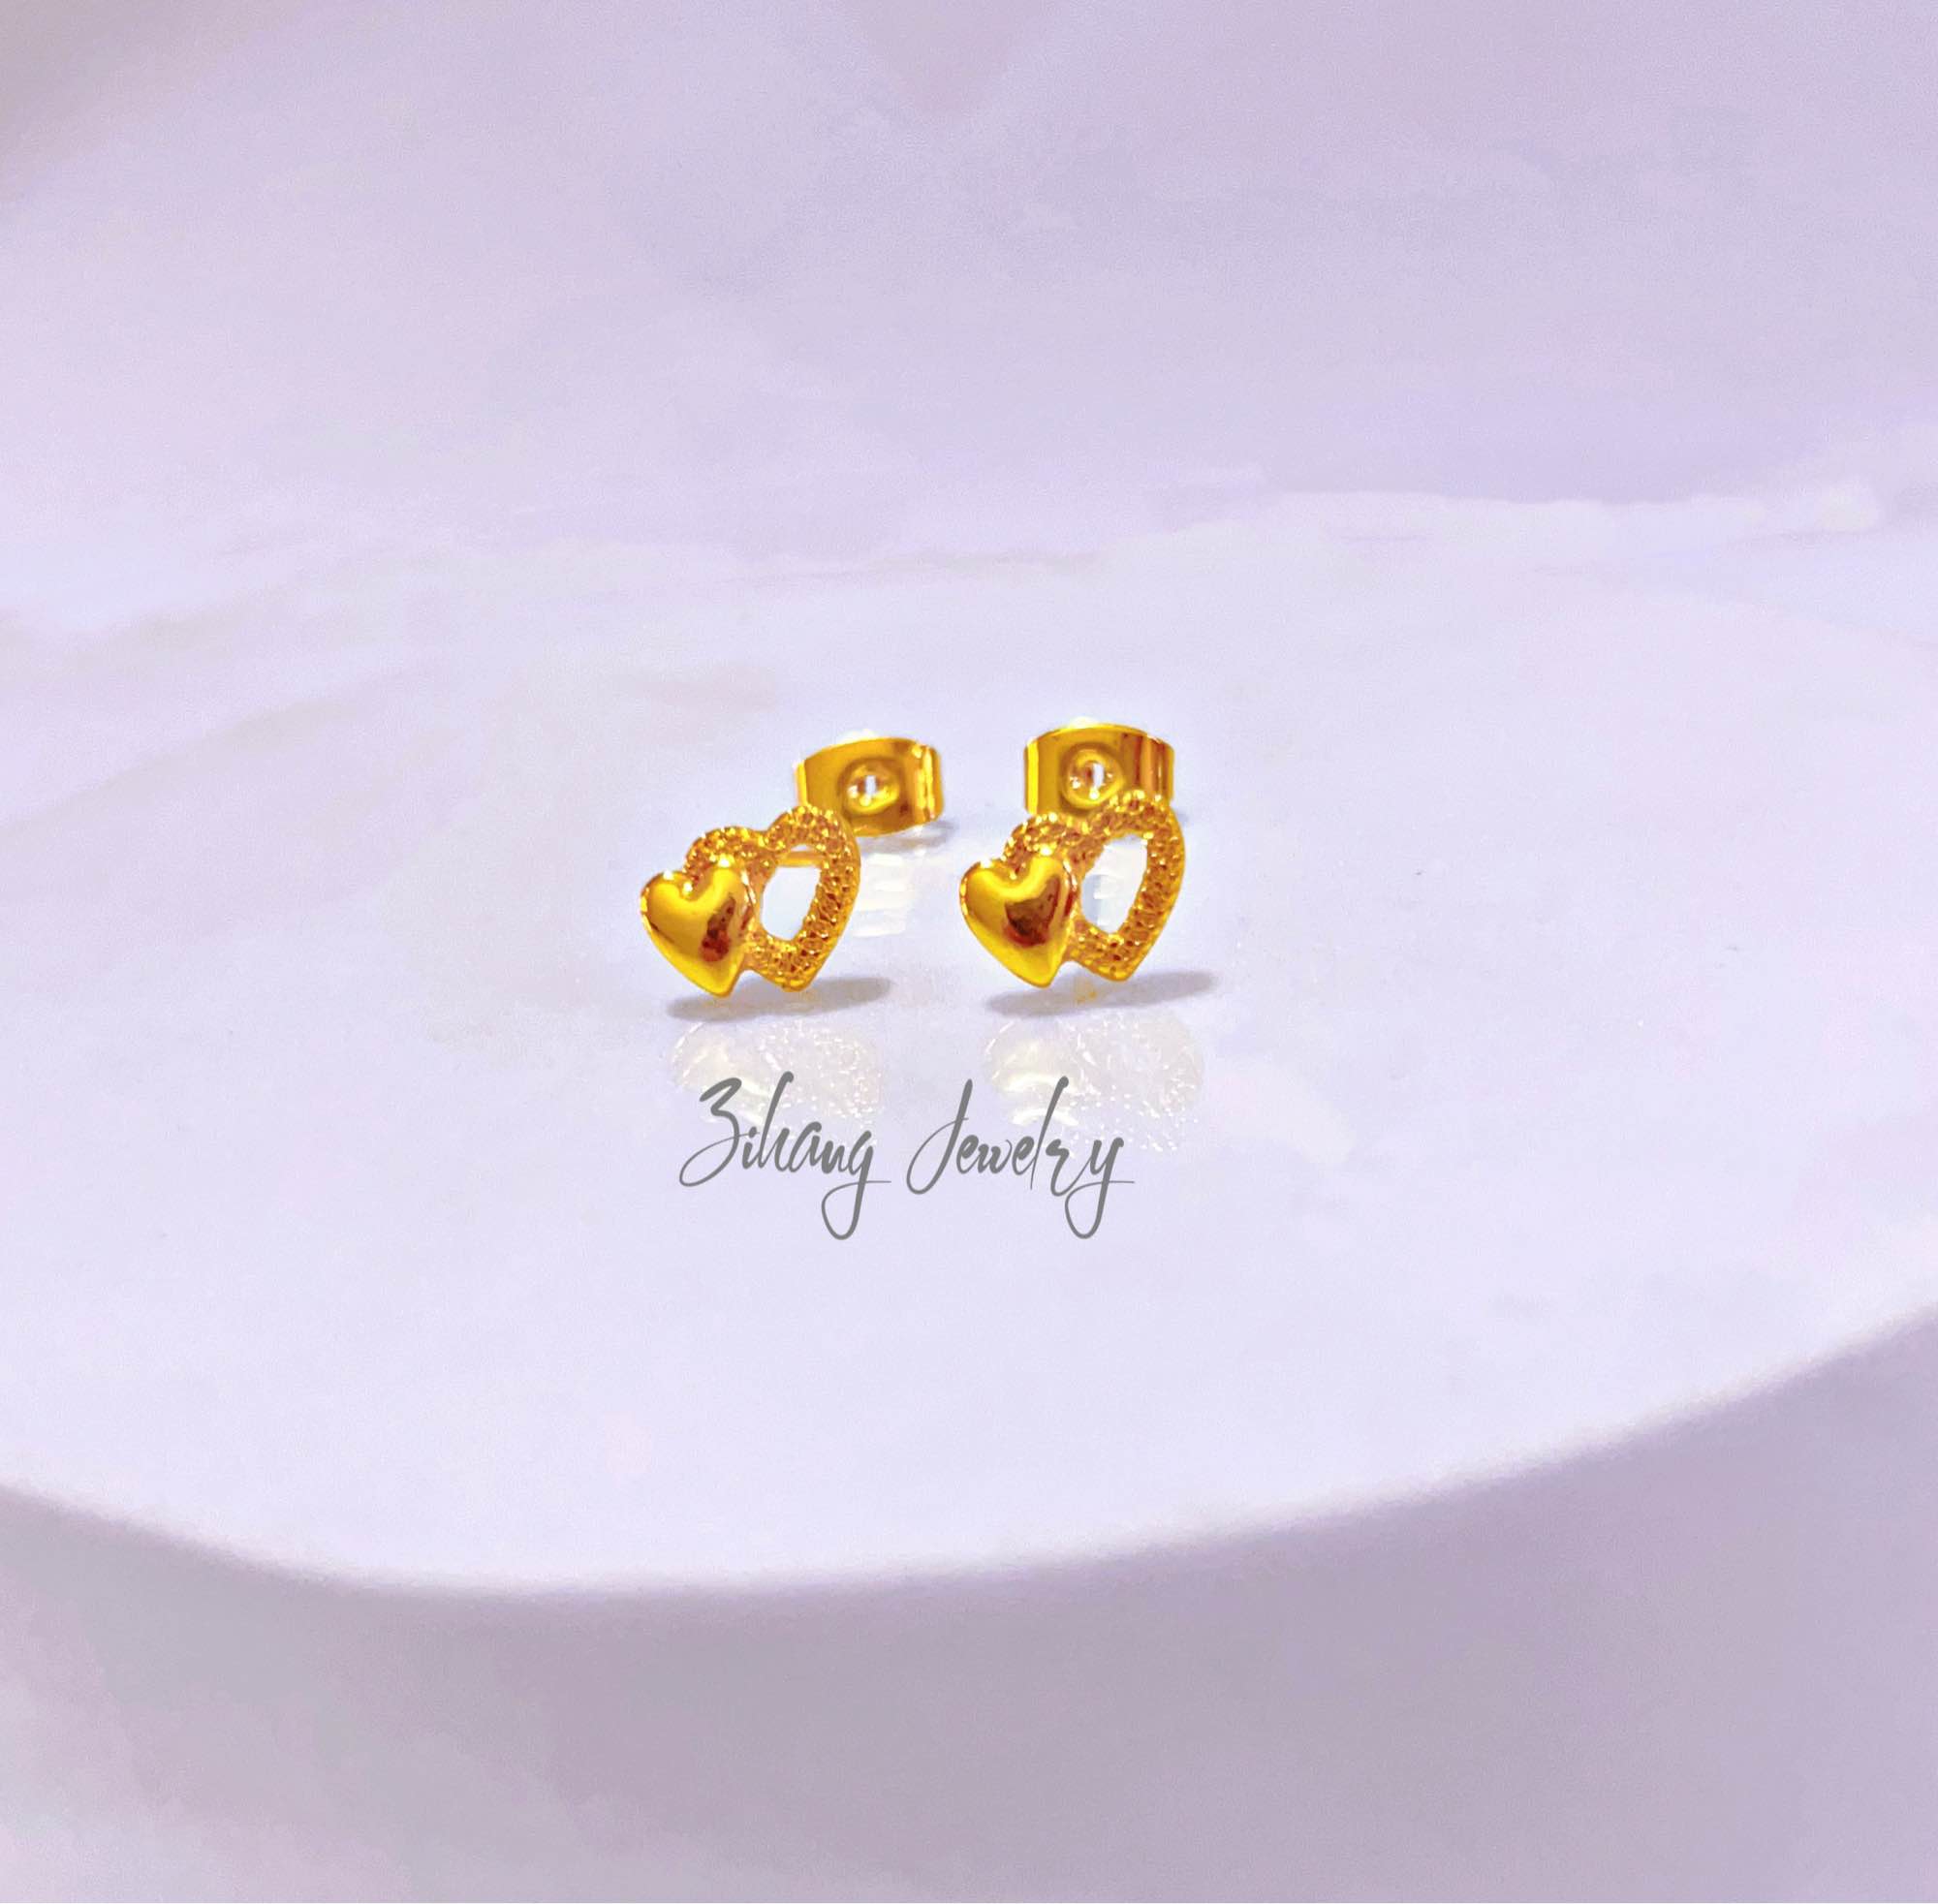 Zihang Jewelry Double Heart Gold Studs for Kids and Women